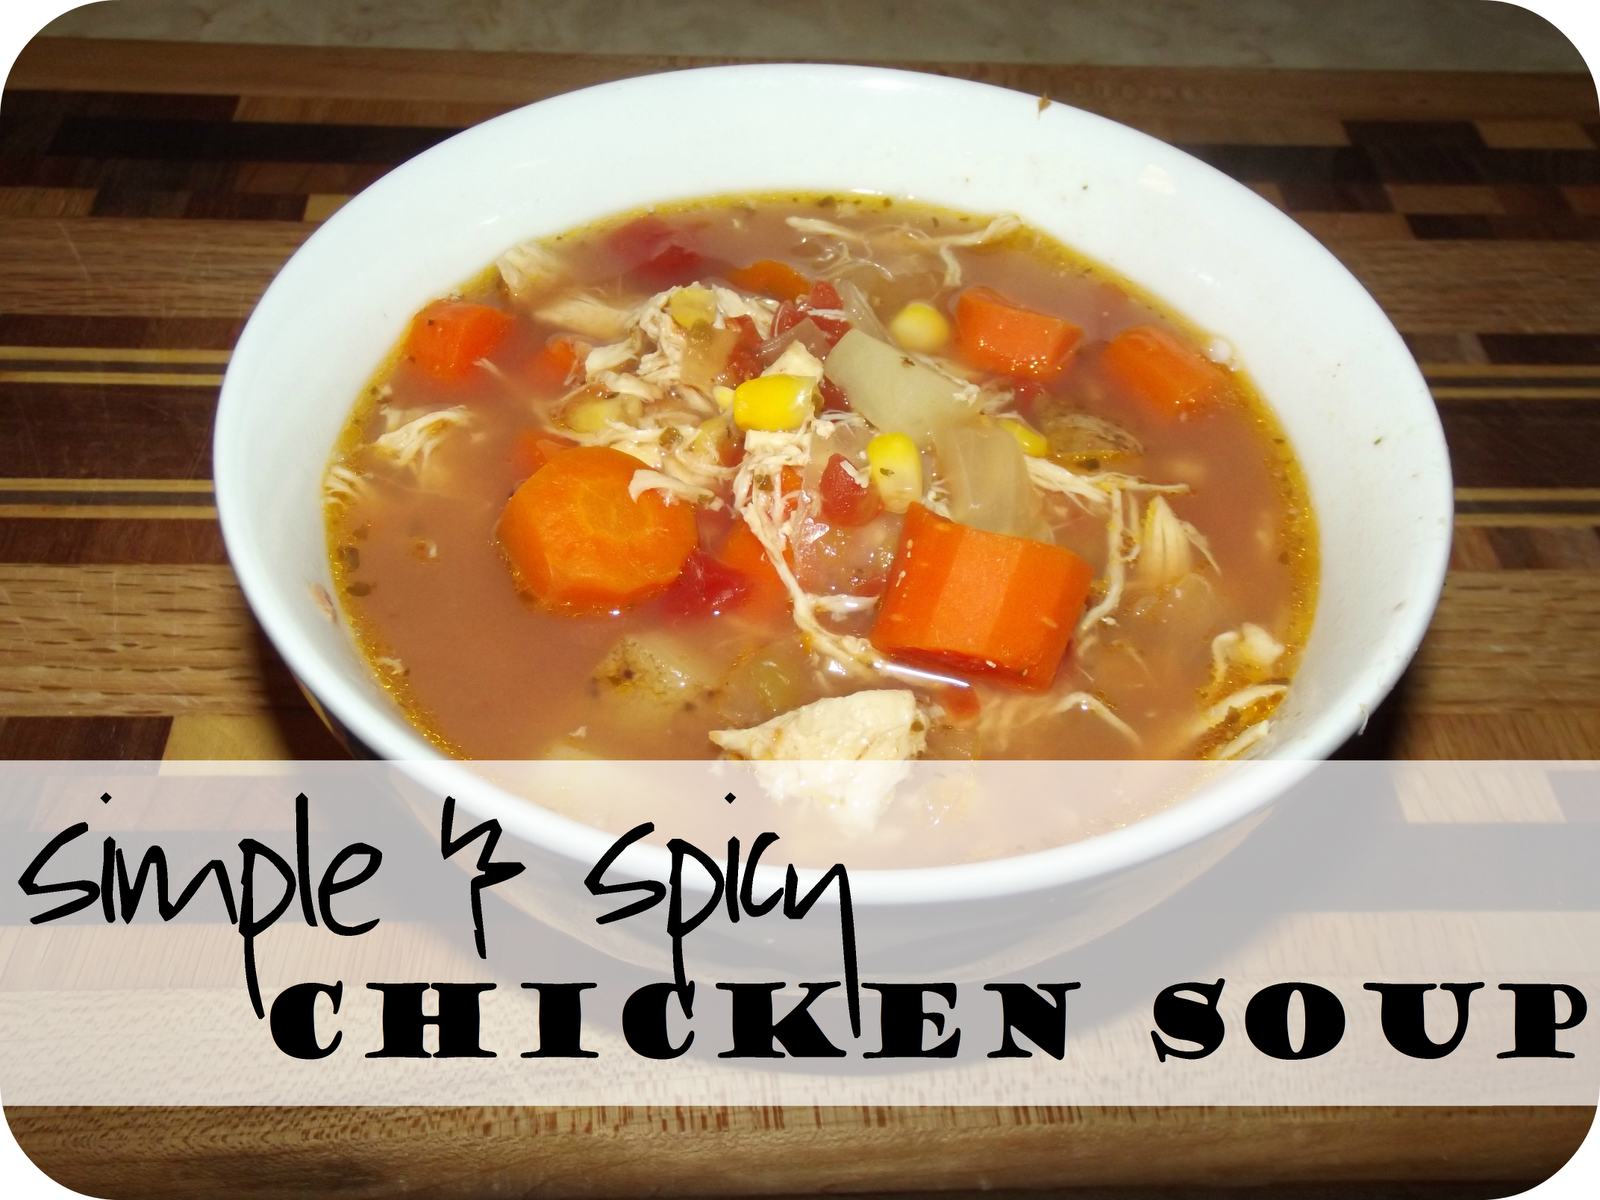 Veronica M.D.: Simple & Spicy Chicken Soup